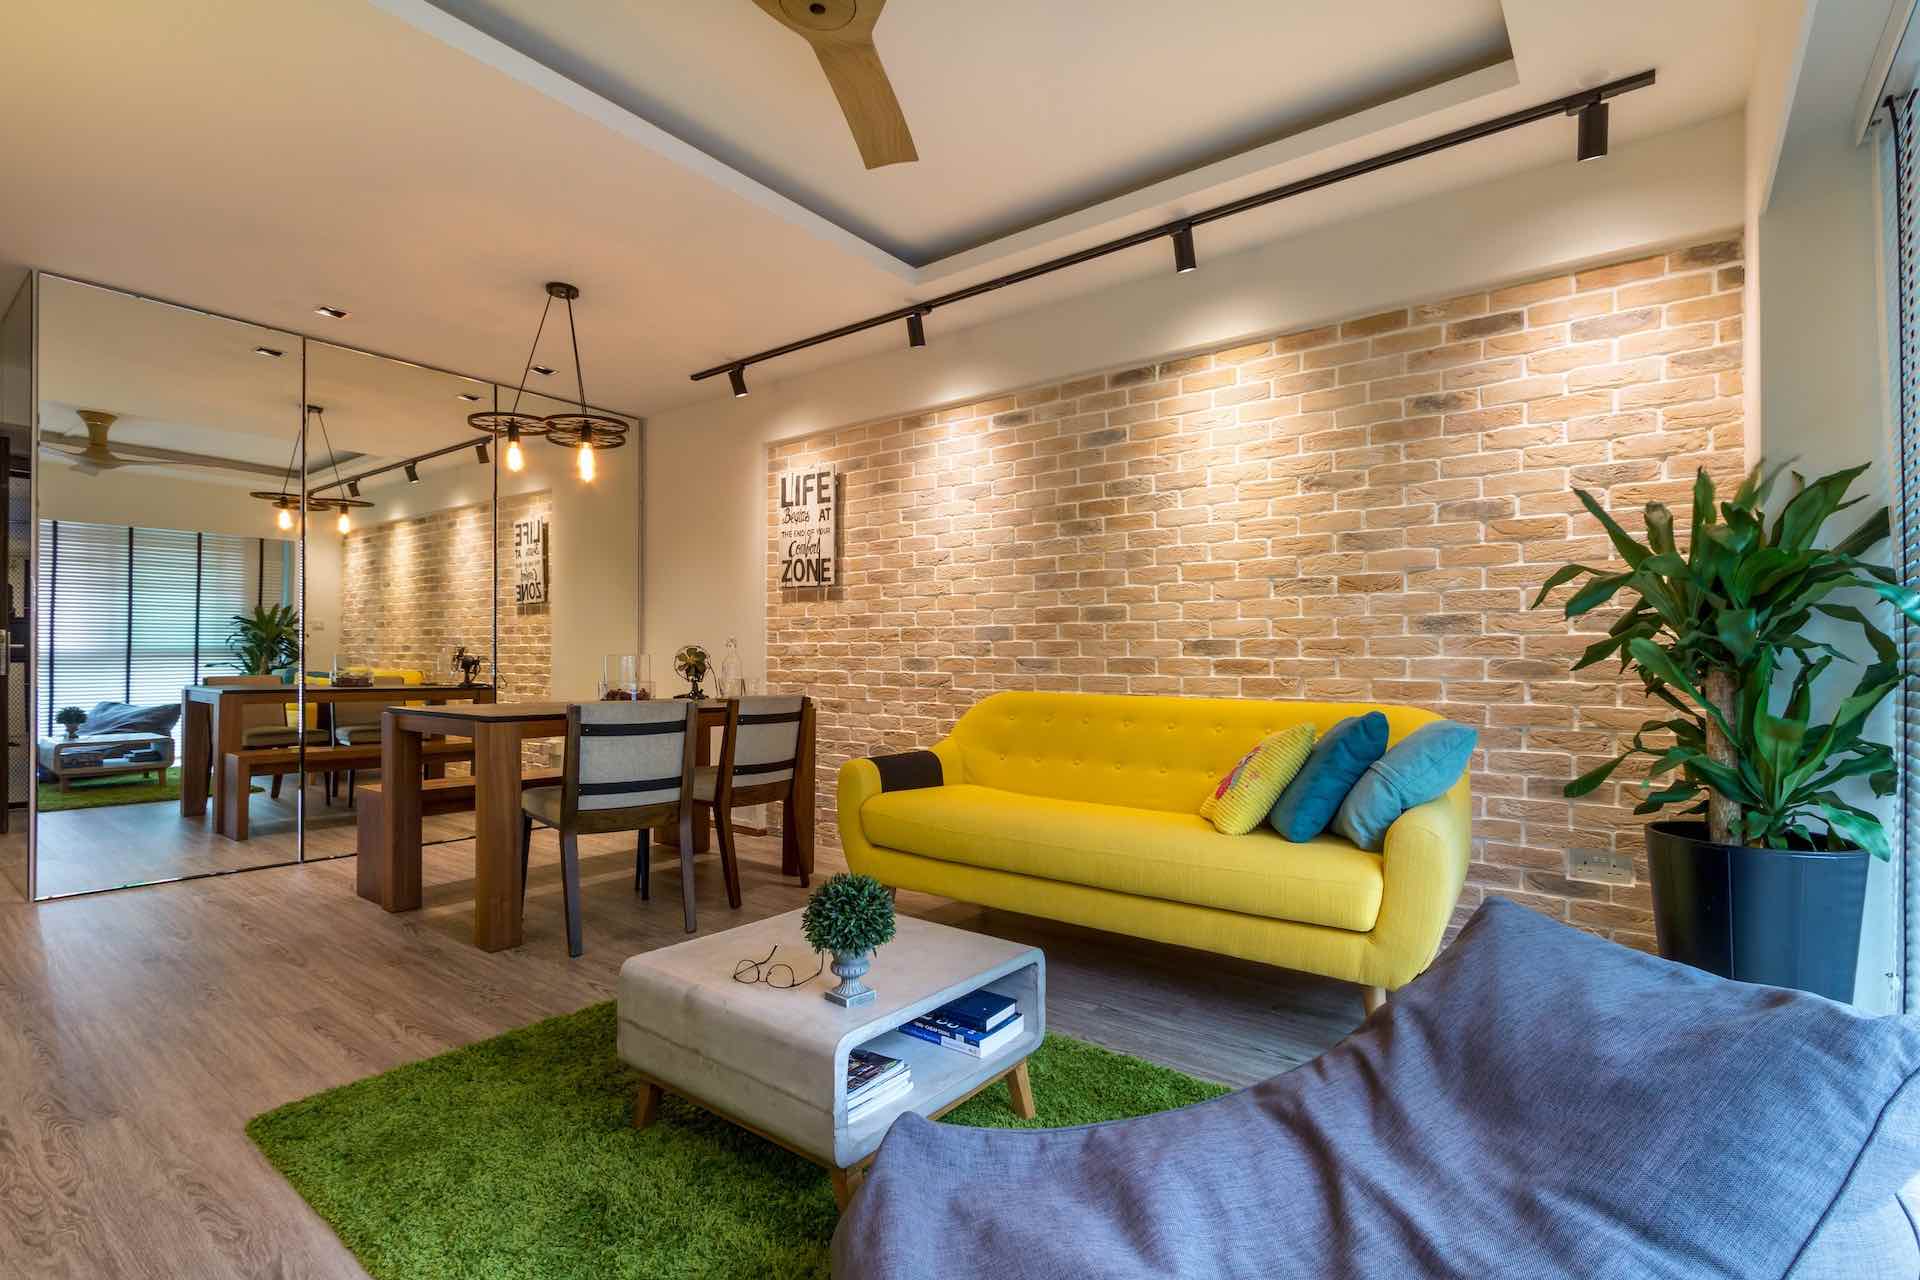 Living room of a Scandustrial style with vibrant honey yellow couch leaned against exposed brick accent wall coupled with grass